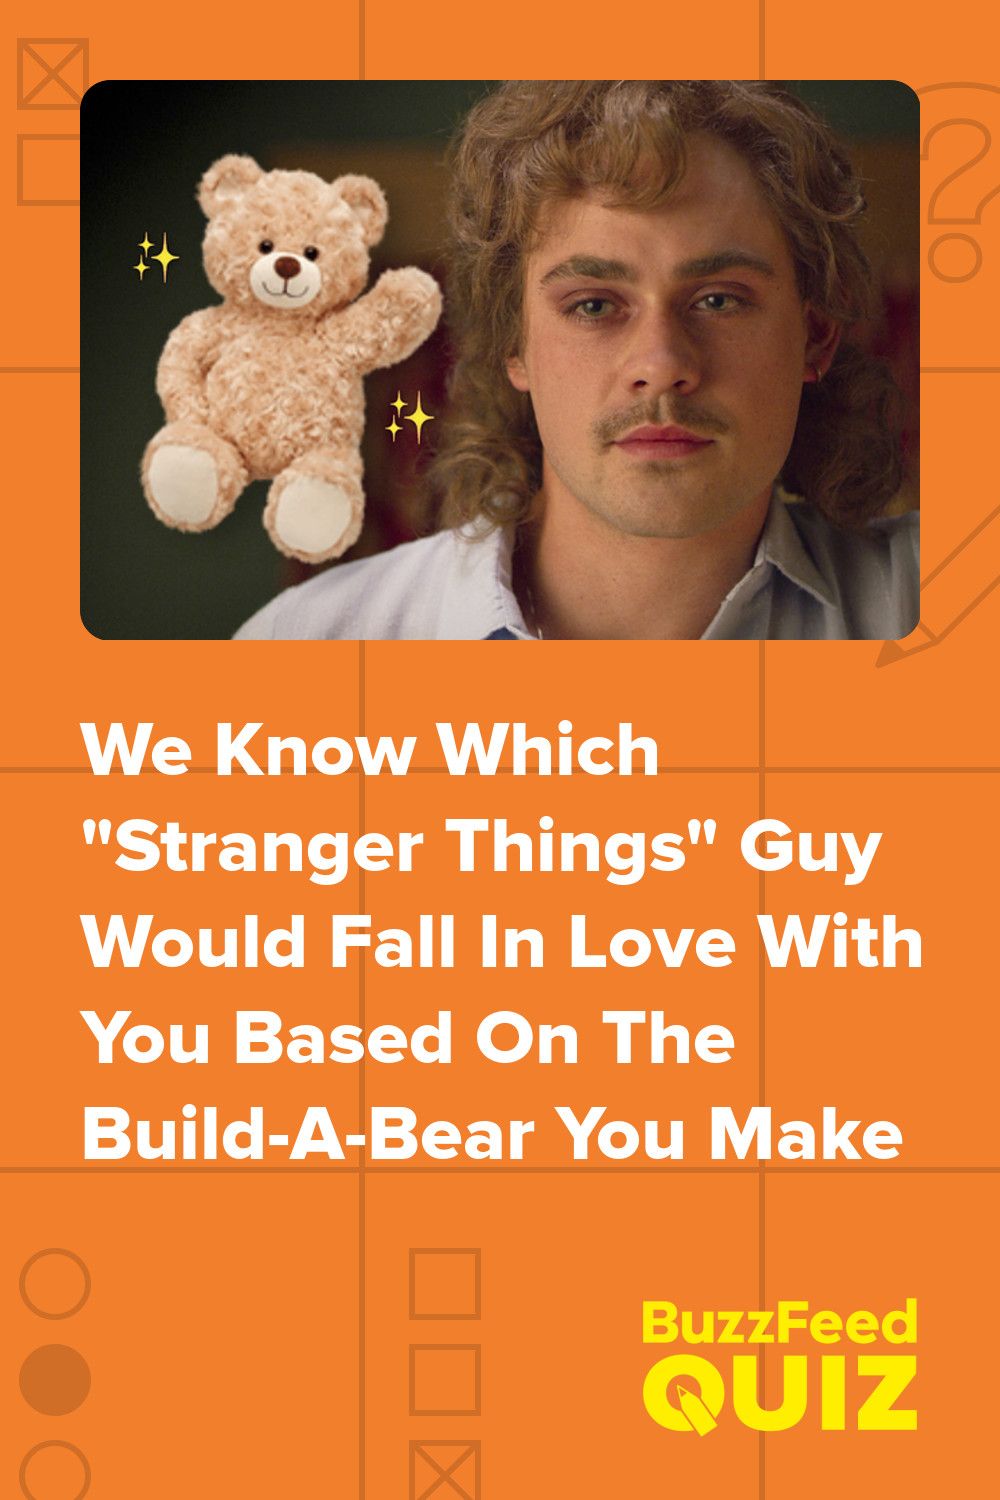 Build A Build-A-Bear And We'll Give You A "Stranger Things" Boyfriend